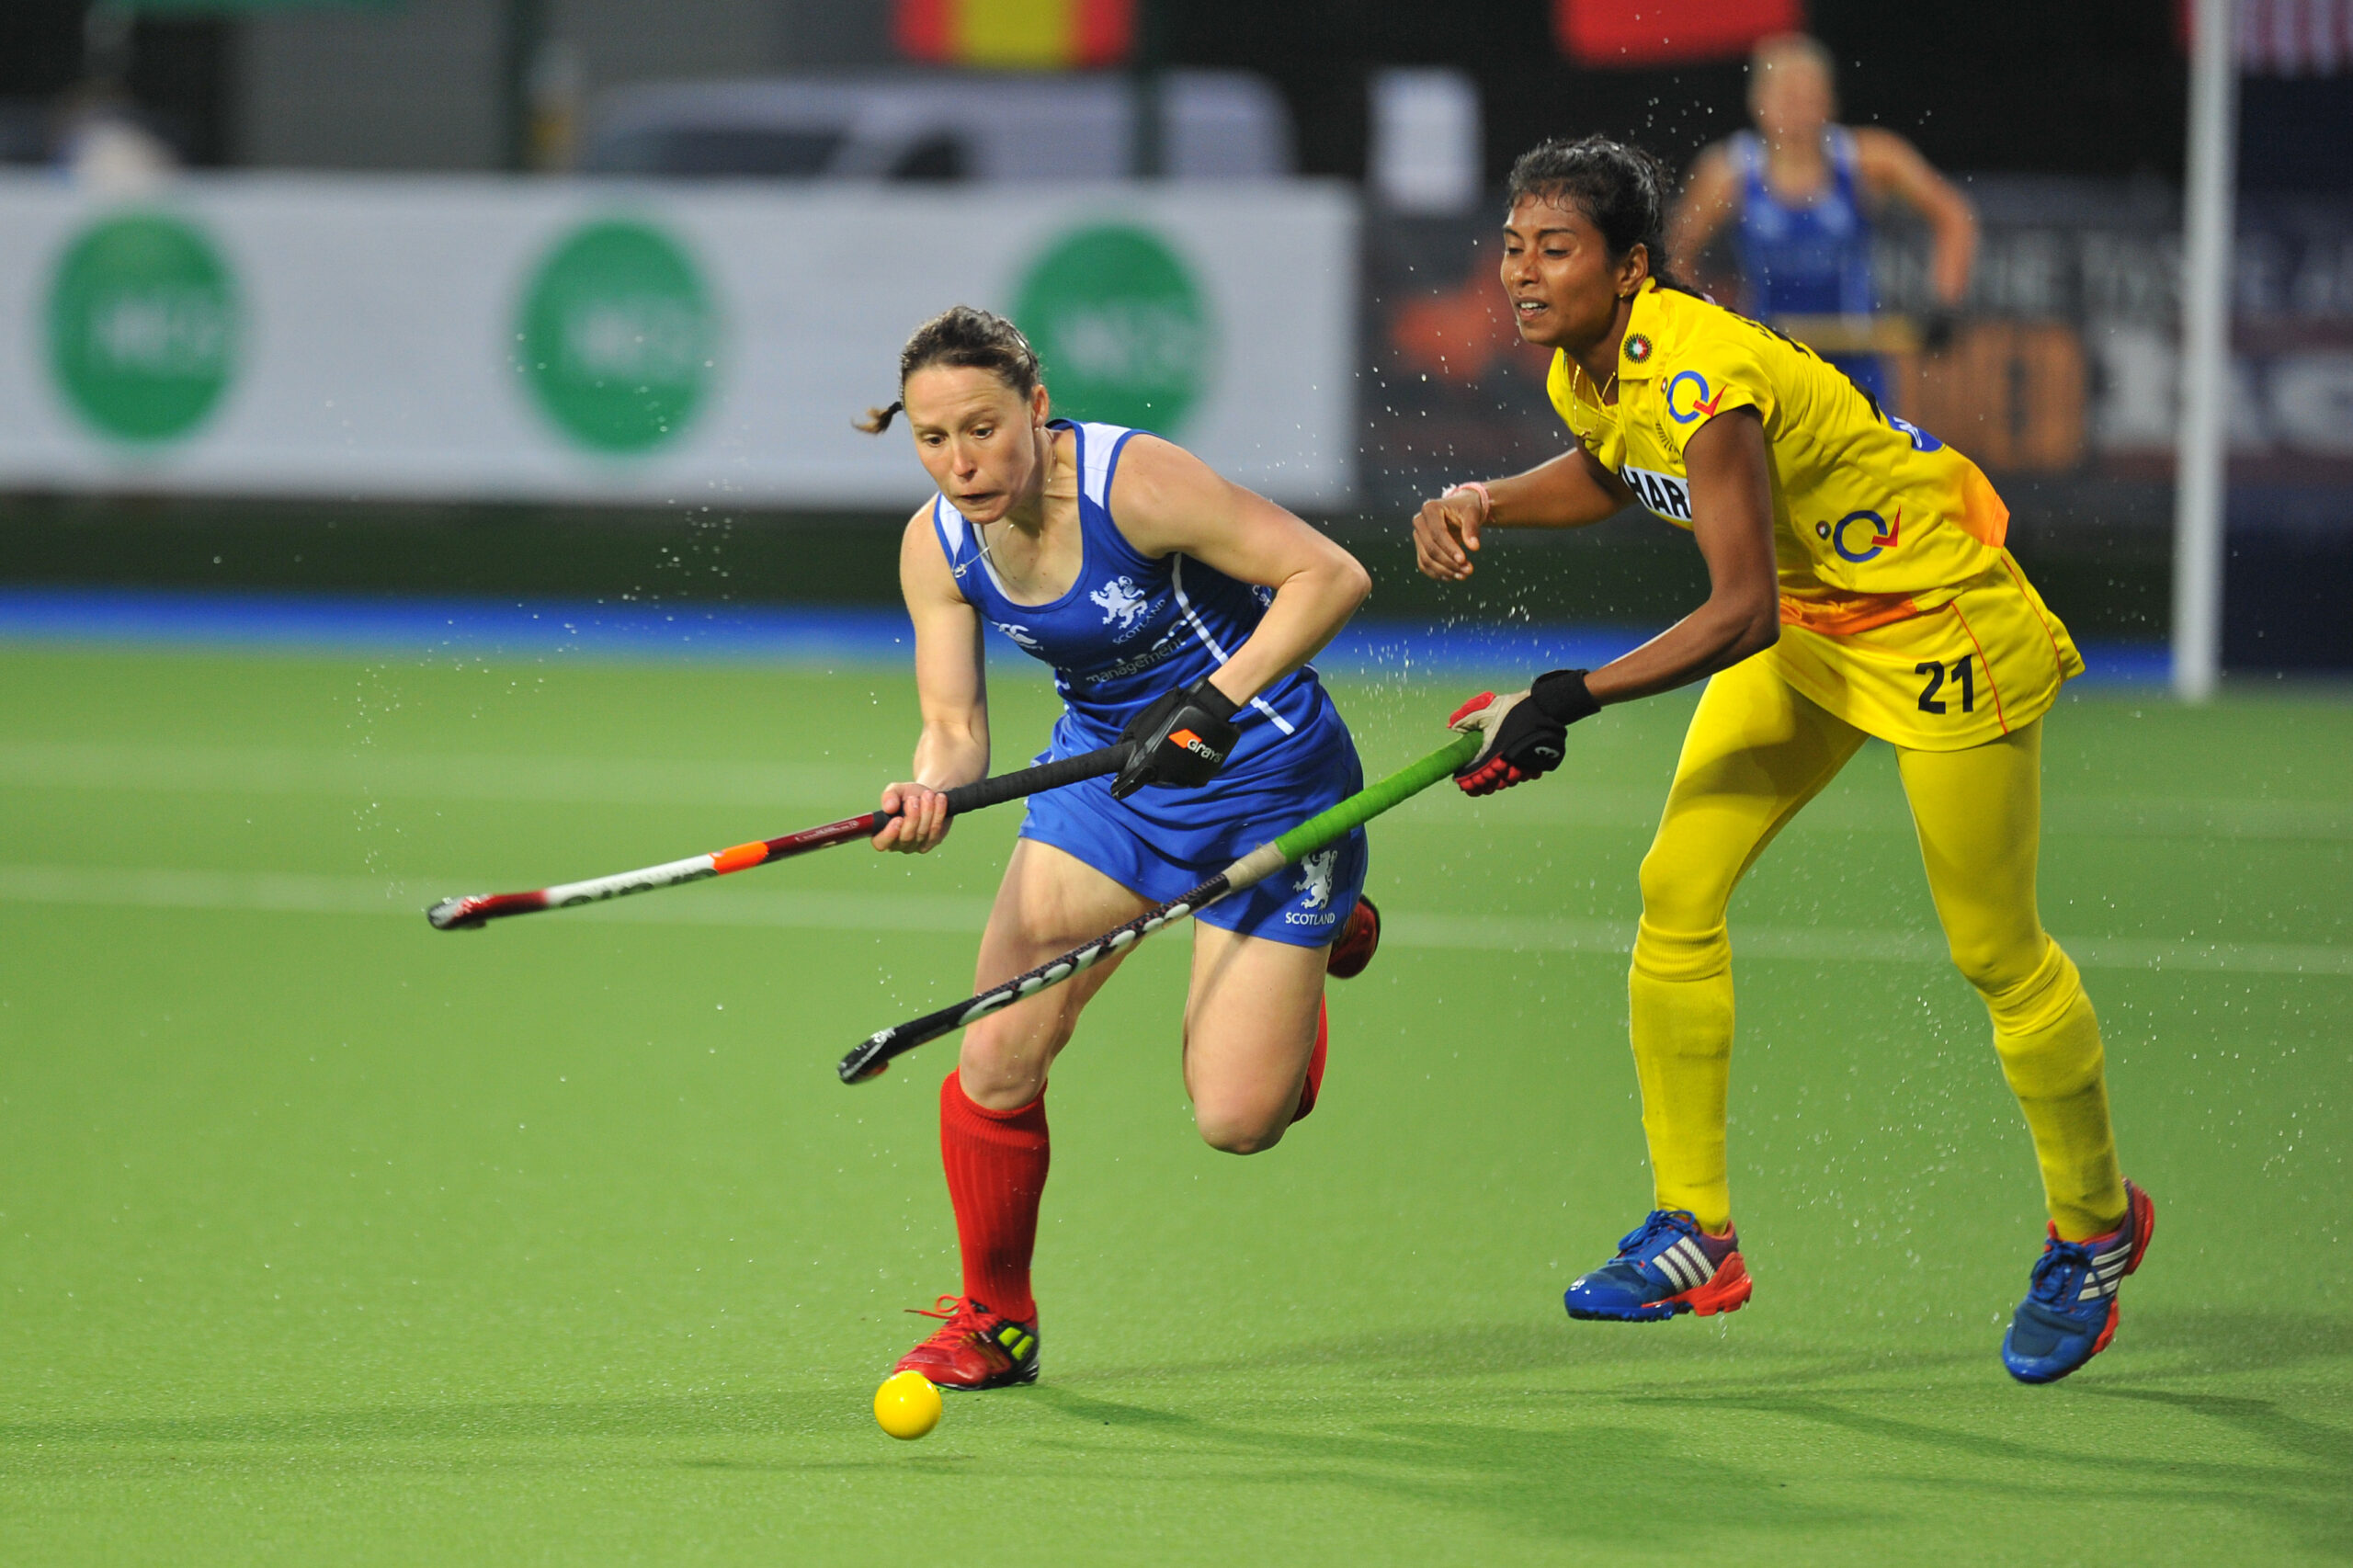 Scotland's Vikki Bunce was on target against India, scoring the home side's third goal Photo Credit Duncan Gray.jpg